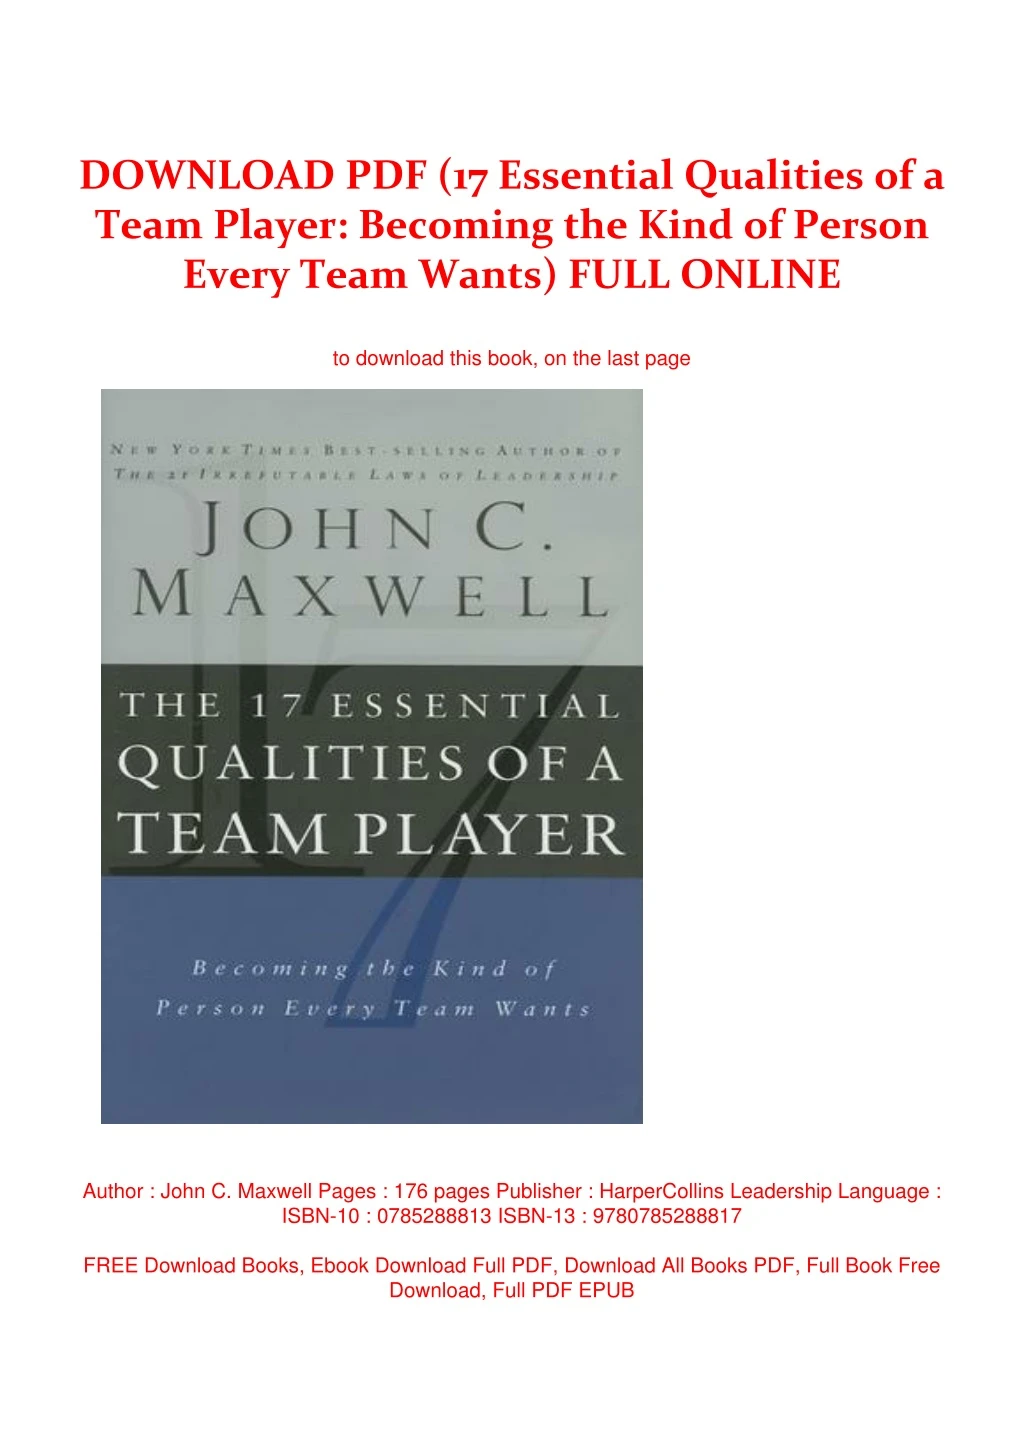 download pdf 17 essential qualities of a team